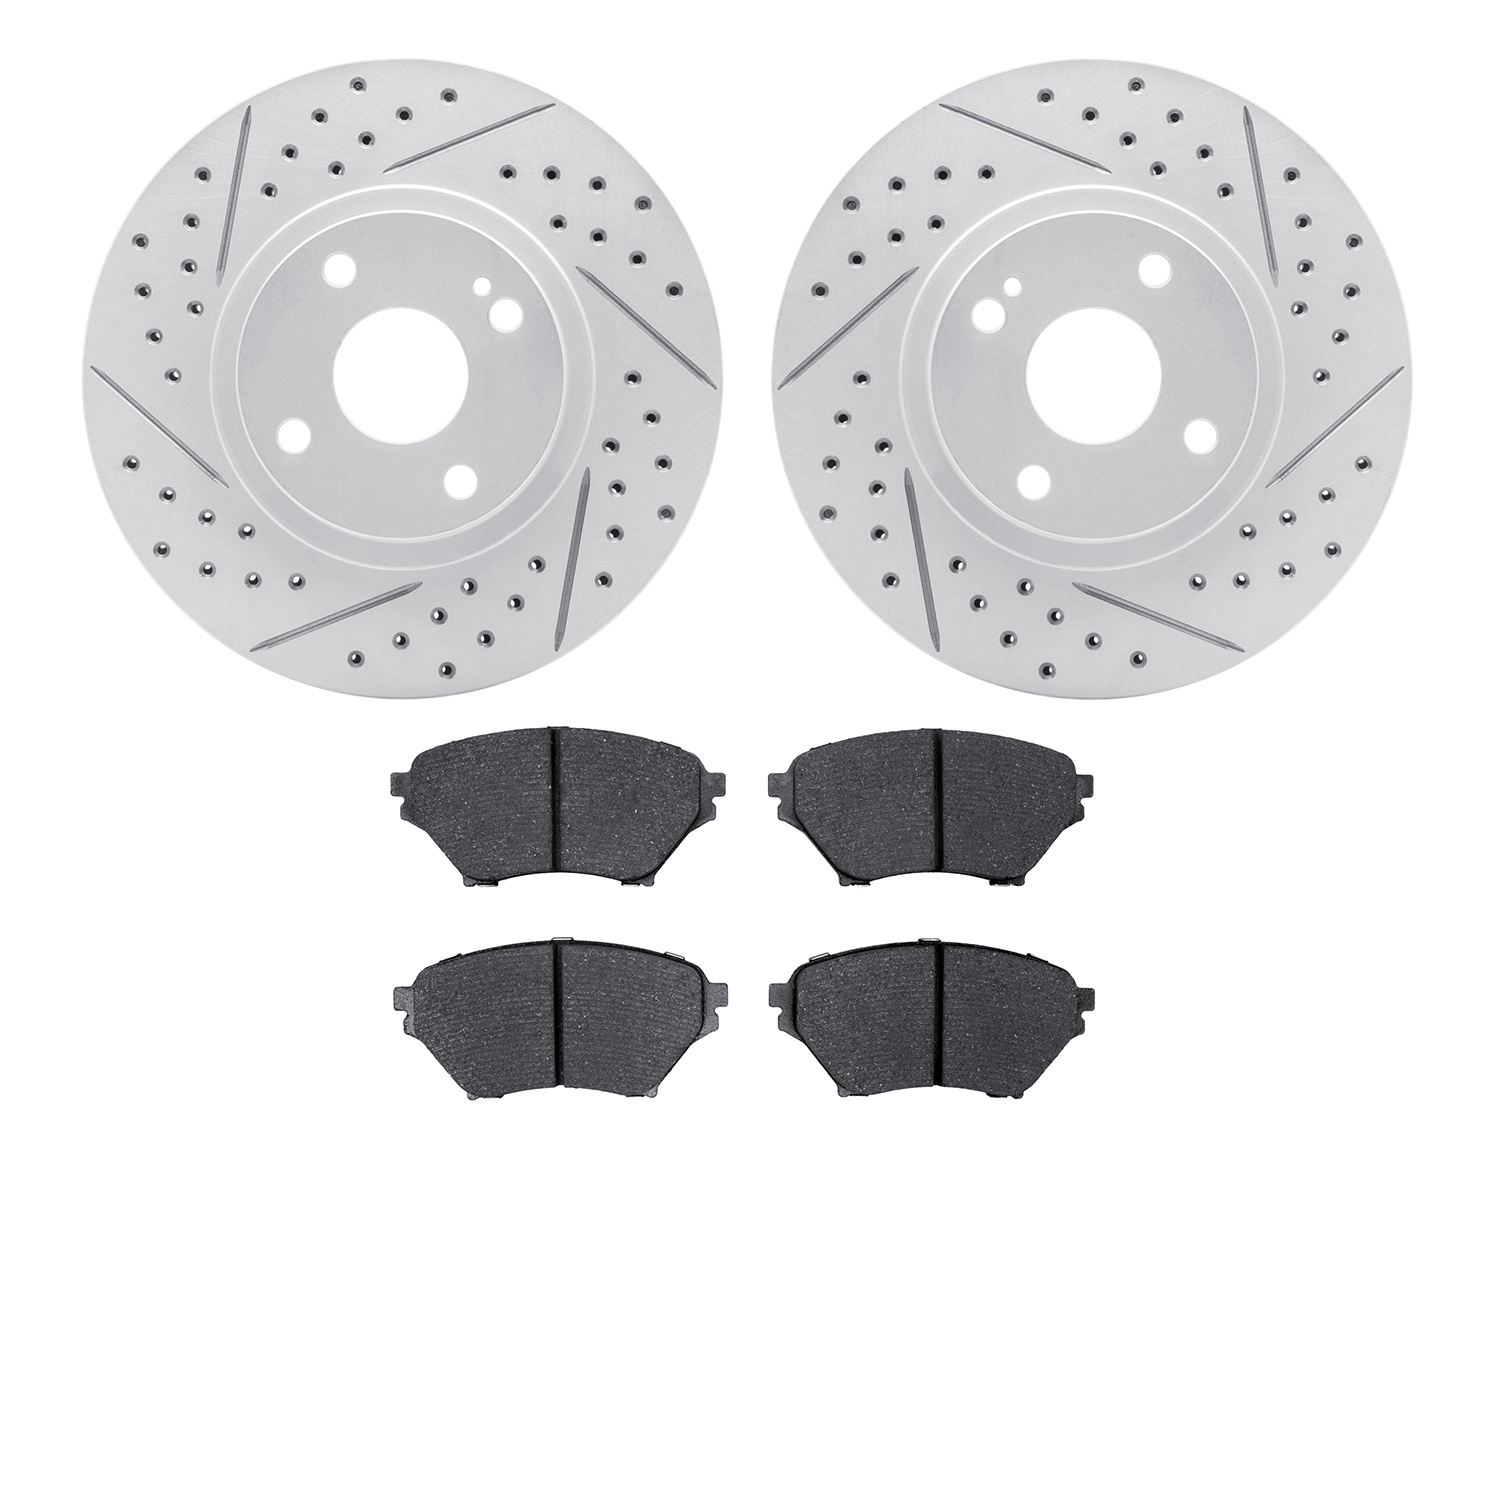 2502-80009 Geoperformance Drilled/Slotted Rotors w/5000 Advanced Brake Pads Kit, 2001-2005 Ford/Lincoln/Mercury/Mazda, Position: